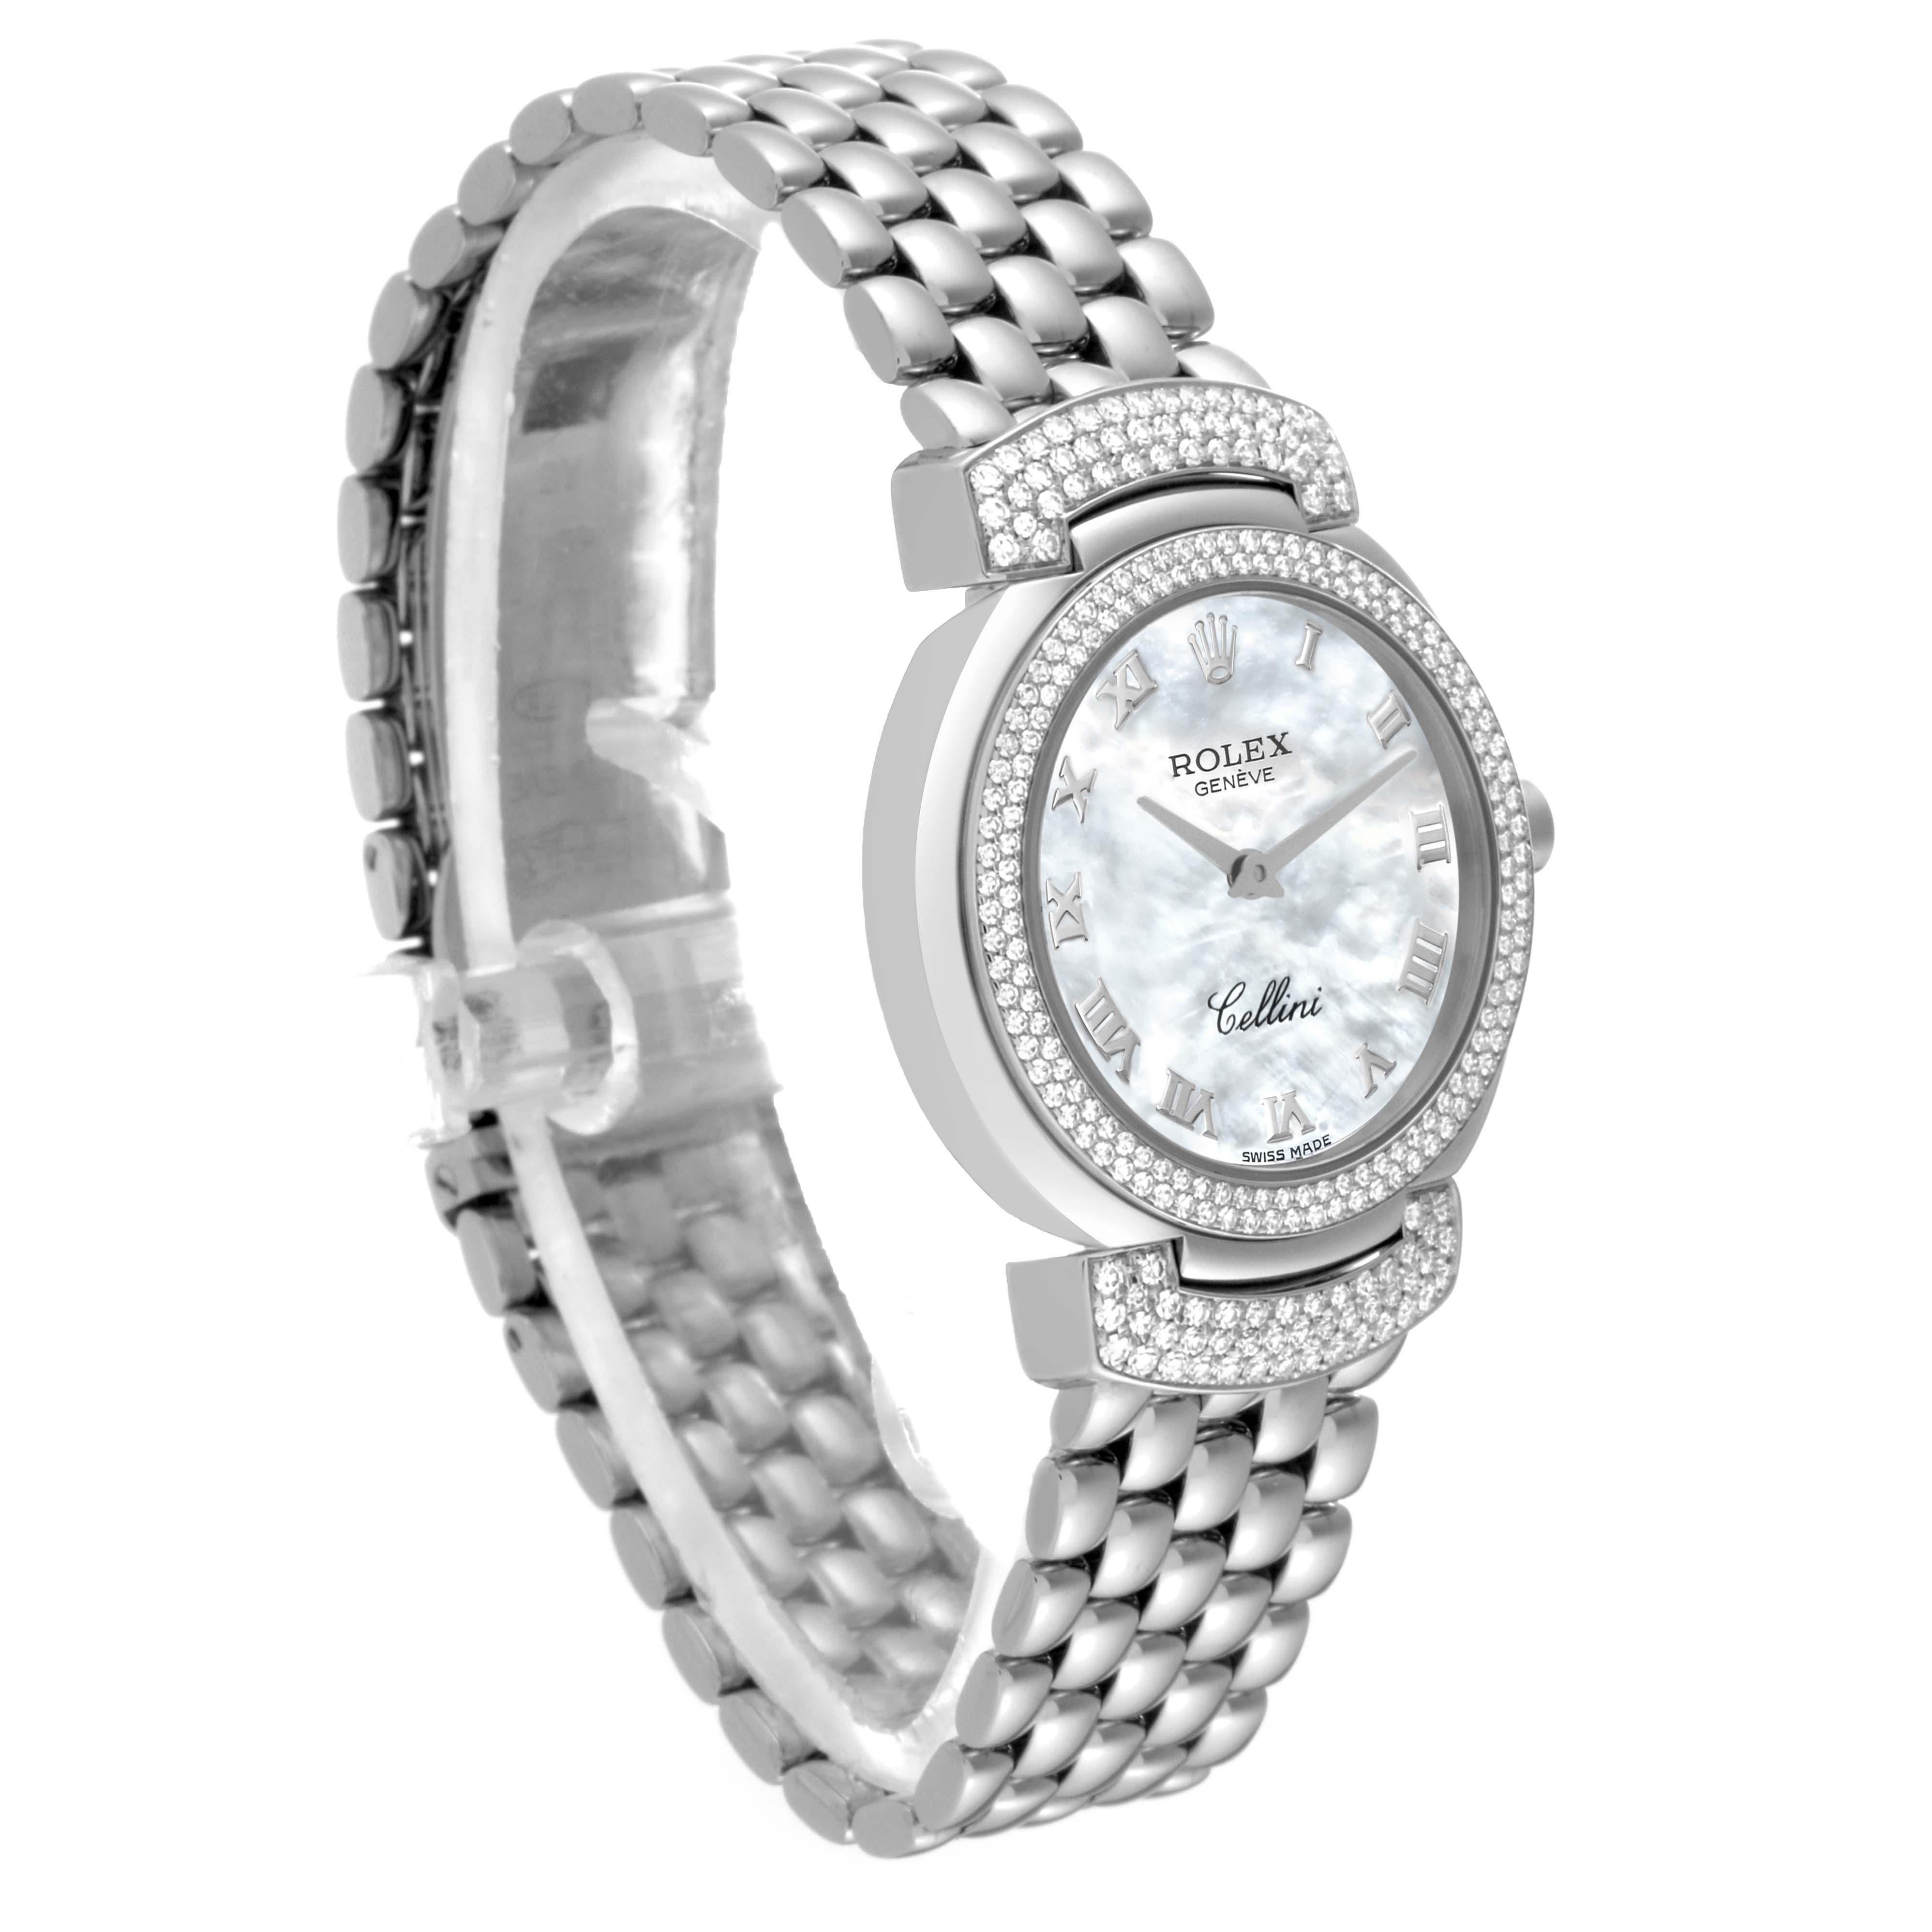 Women's Rolex Cellini Cellissima White Gold Mother Of Pearl Dial Diamond Ladies Watch For Sale